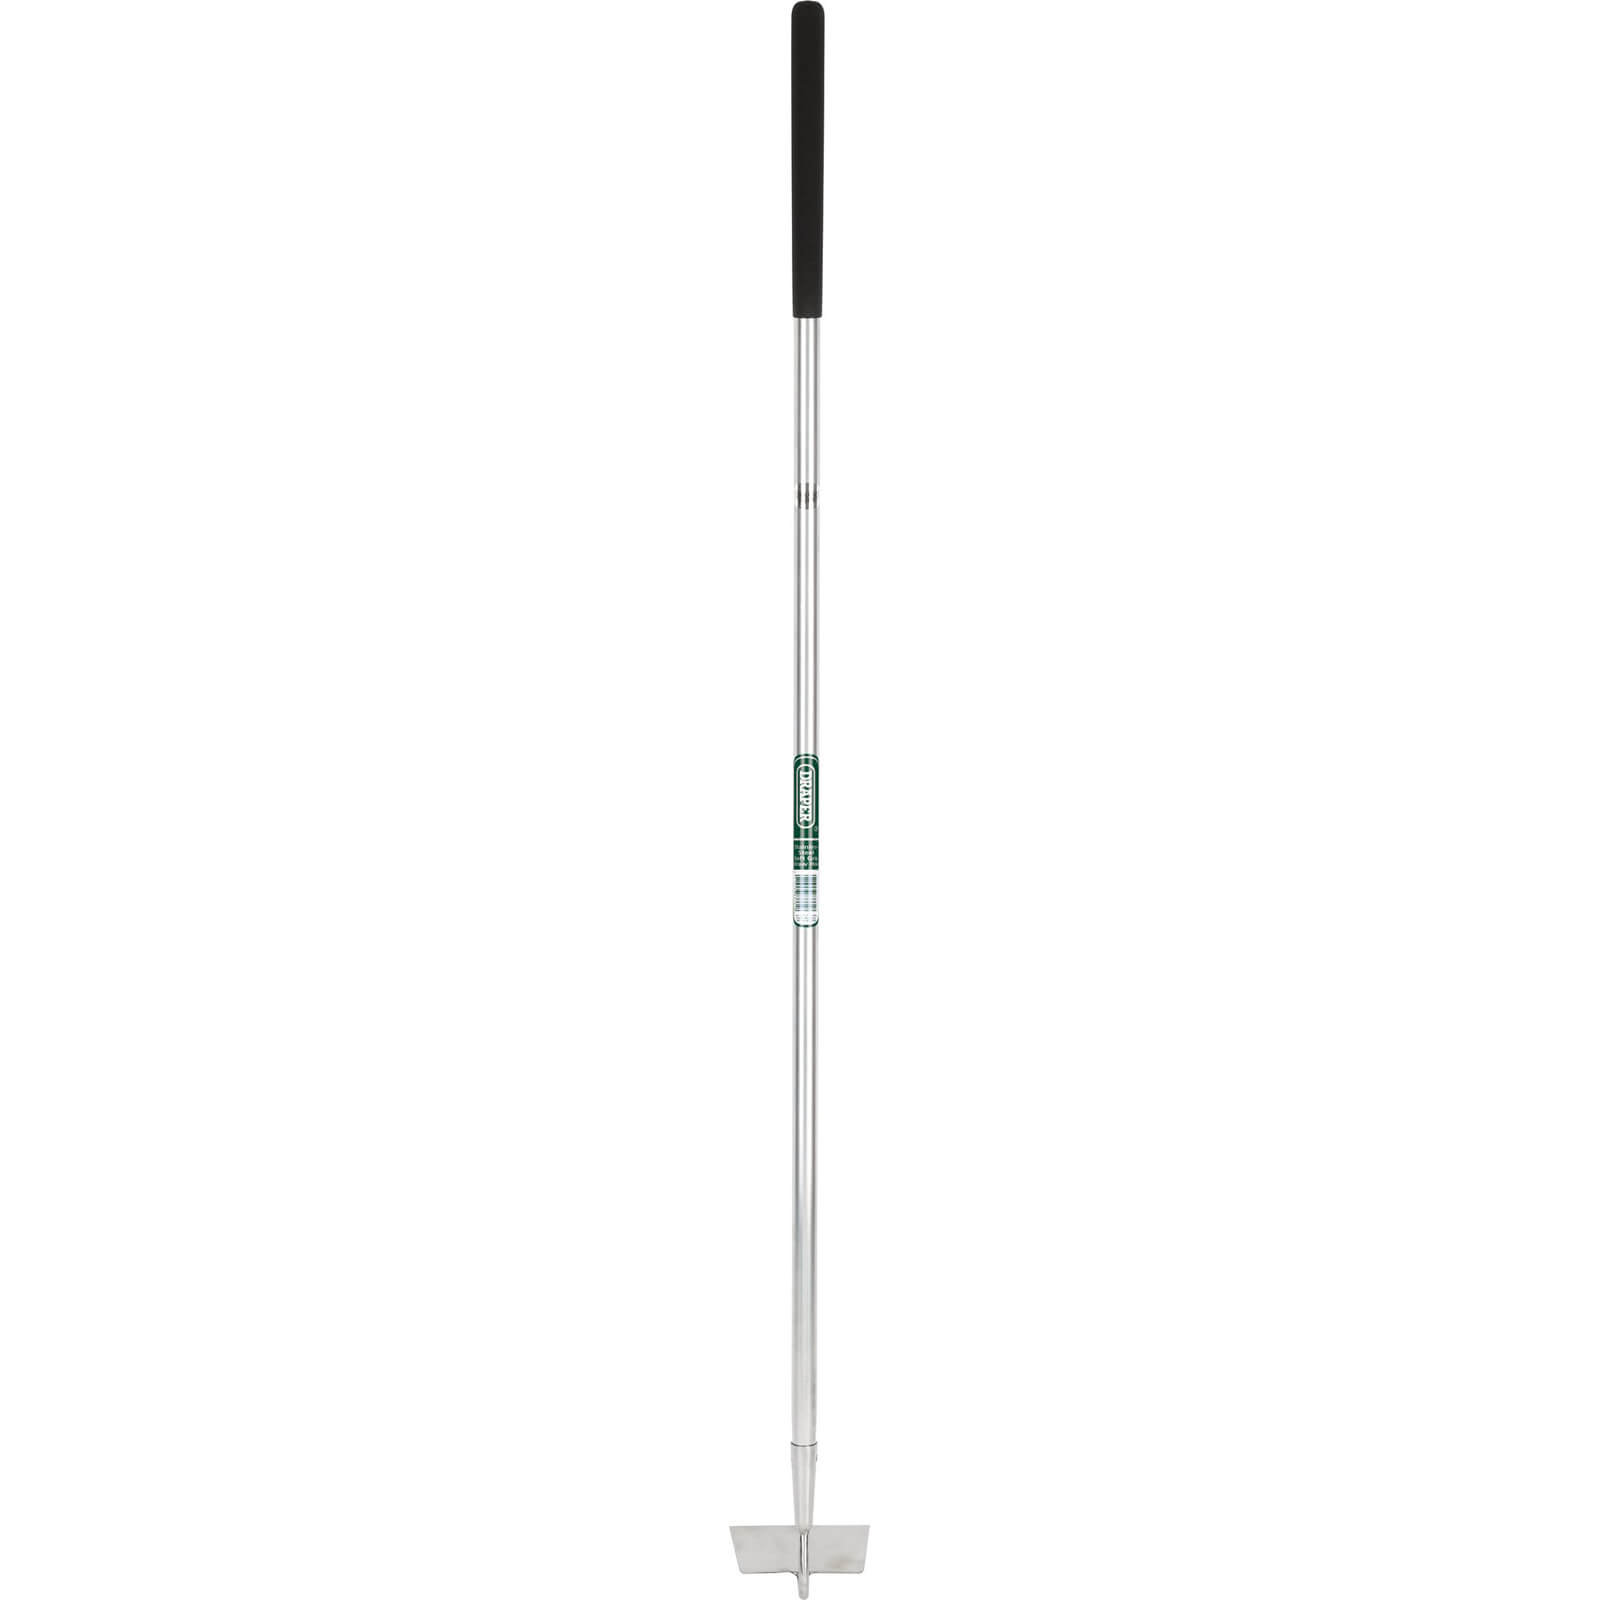 Photos - Planting Tools Draper Stainless Steel Soft Grip Draw Hoe 6103SG/I 